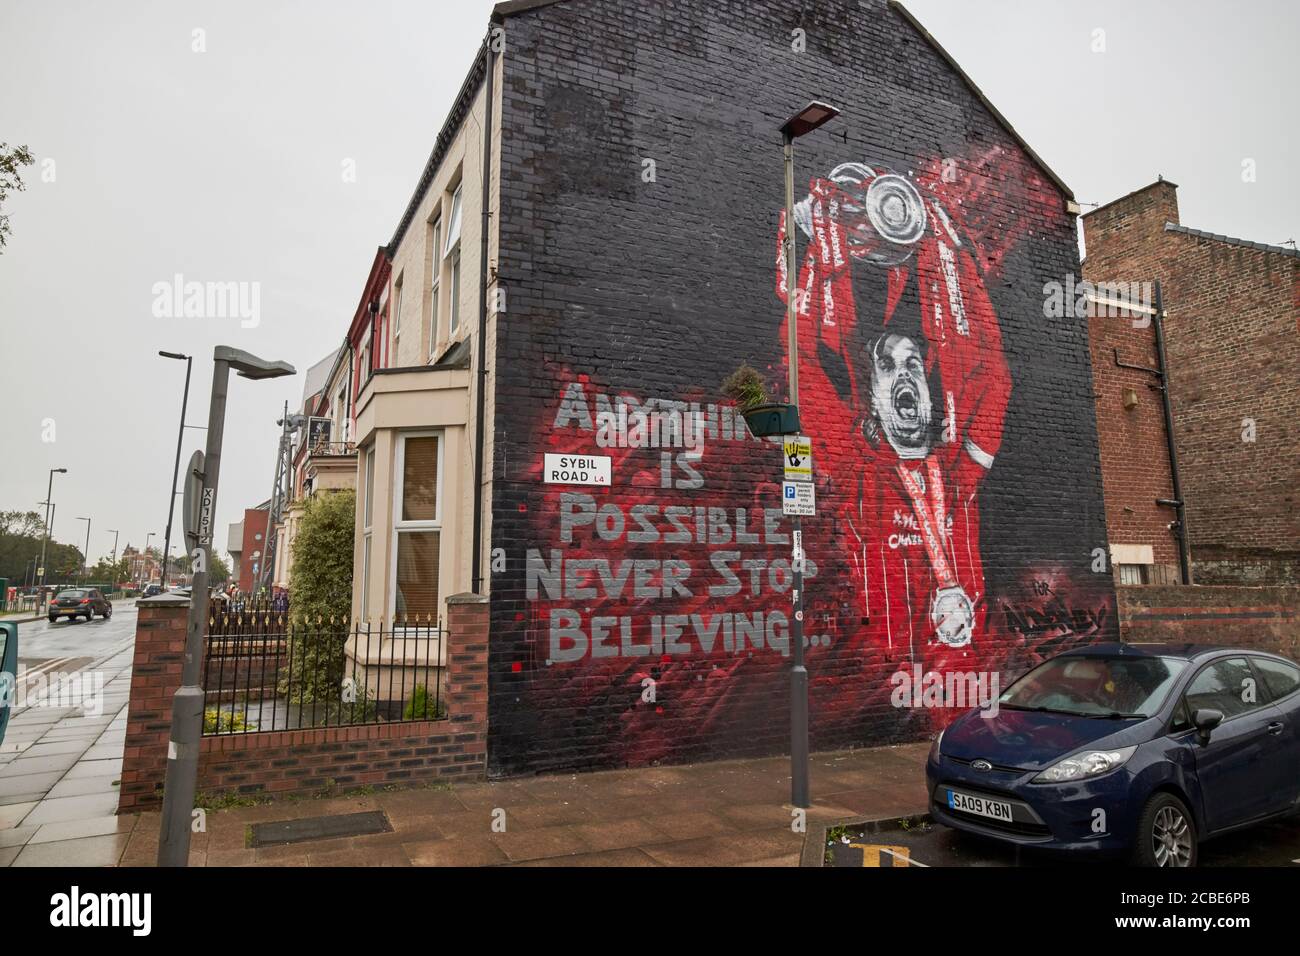 liverpool fc player jordan henderson with premier league trophy wall mural sybil road near anfield liverpool england uk Stock Photo